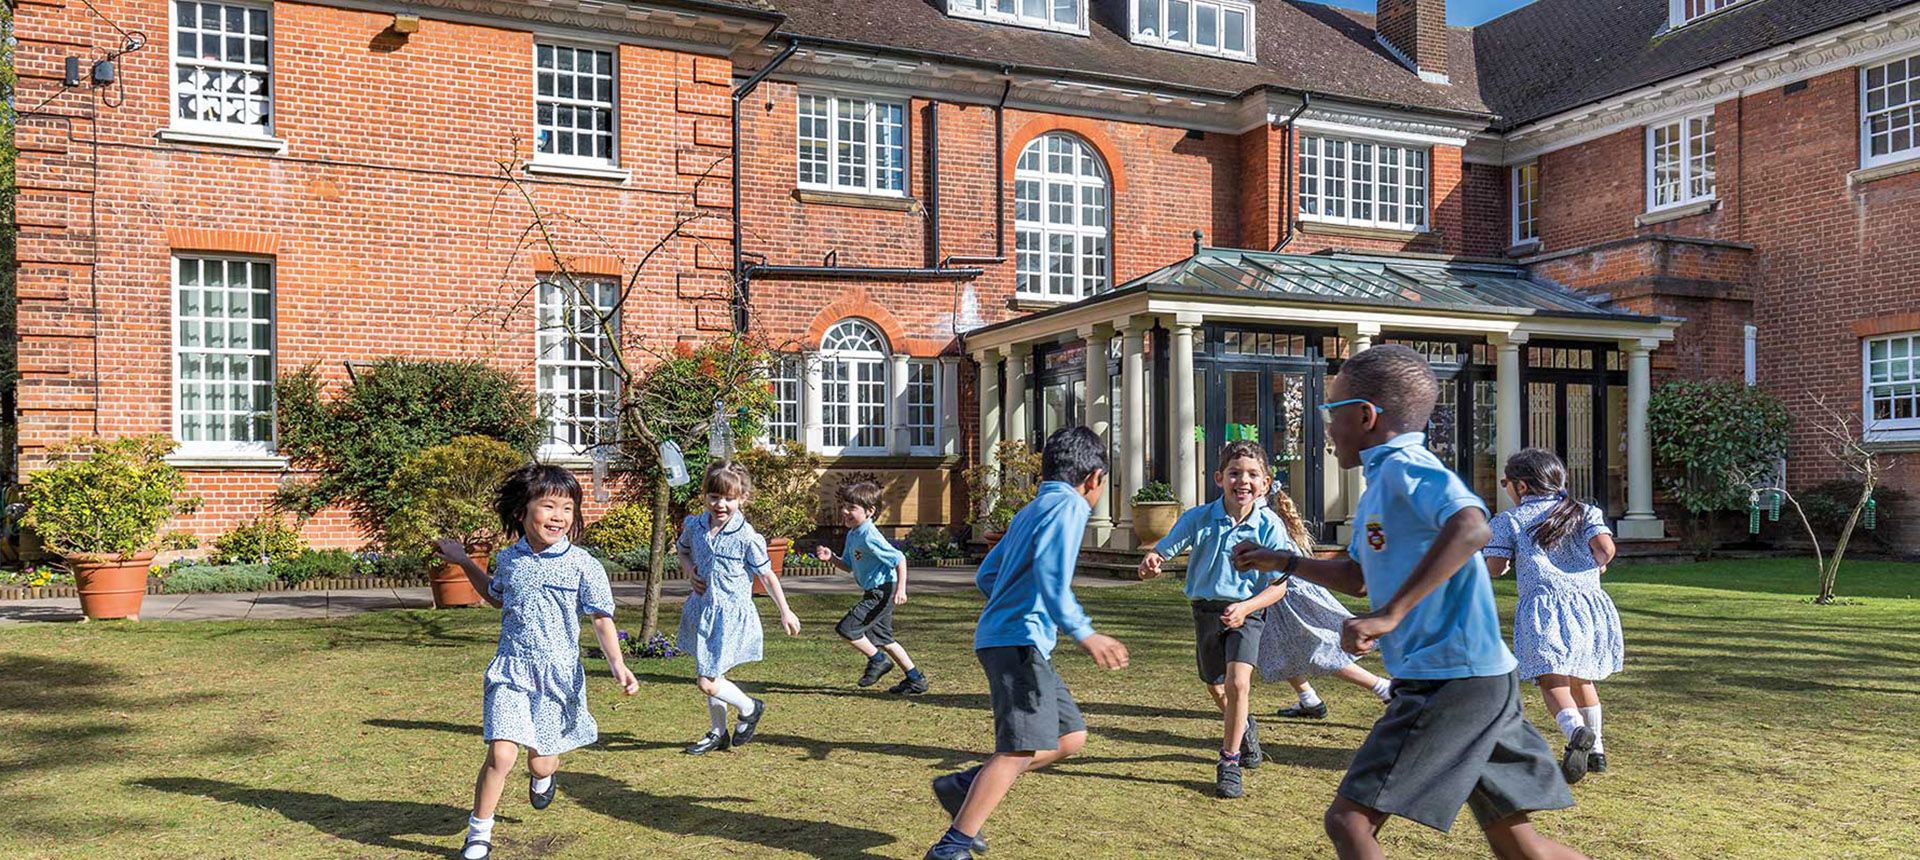 Children playing outside Grimsdell school 